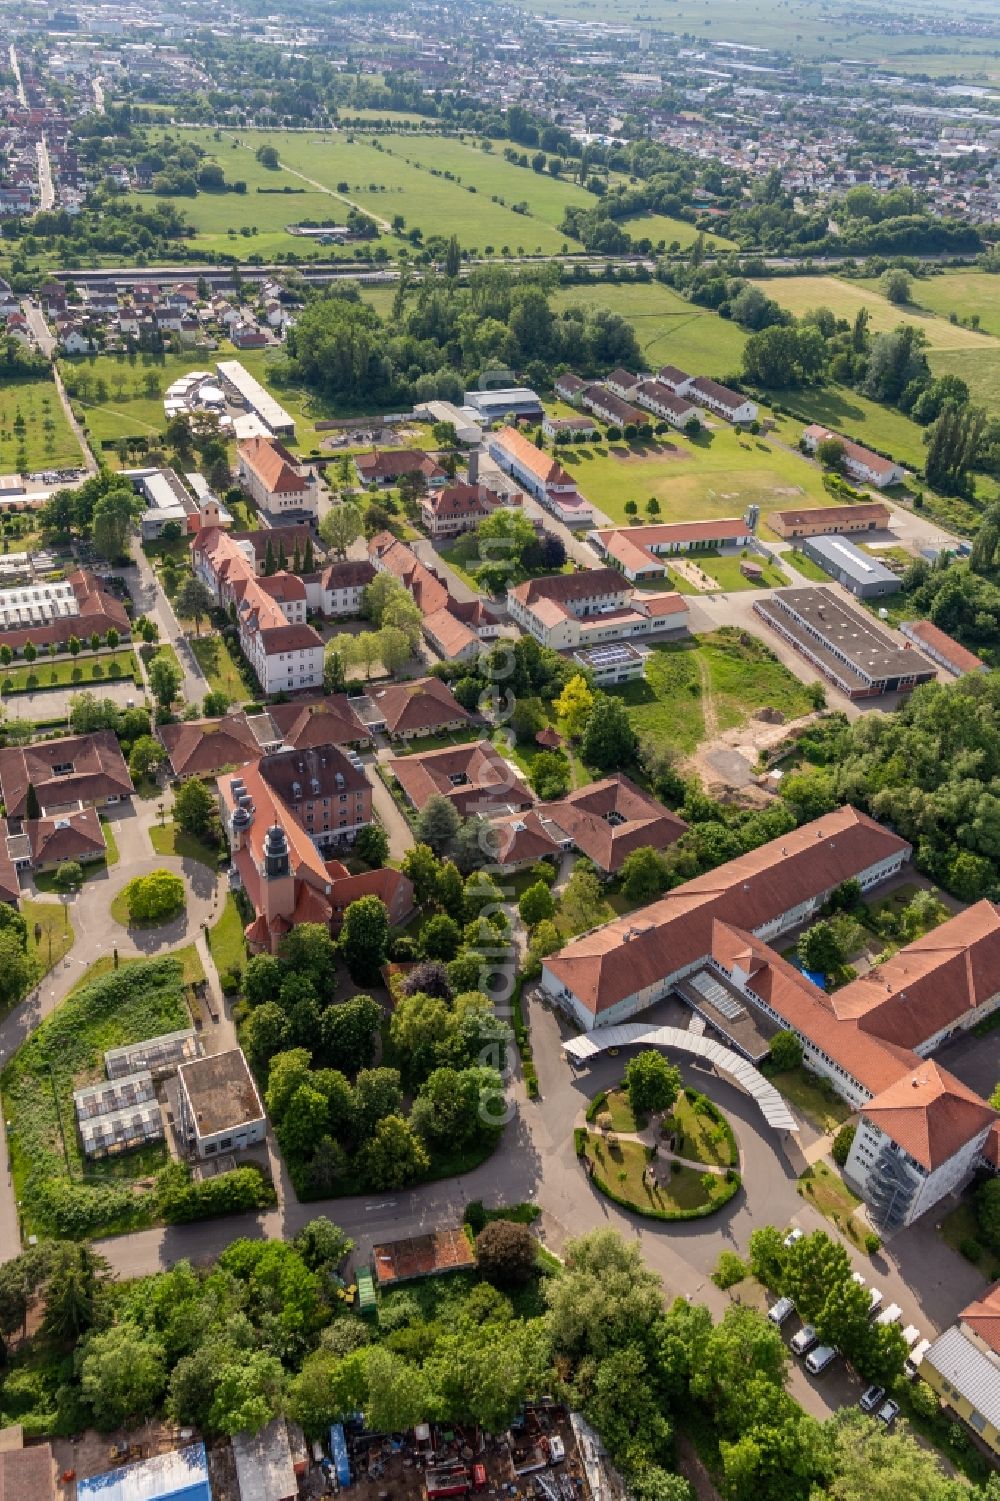 Landau in der Pfalz from above - Building of the retirement home Caritas Foerderzentrum St. Laurentius and Paulus and of the Jugendwerk St. Josef in the district Queichheim in Landau in der Pfalz in the state Rhineland-Palatinate, Germany